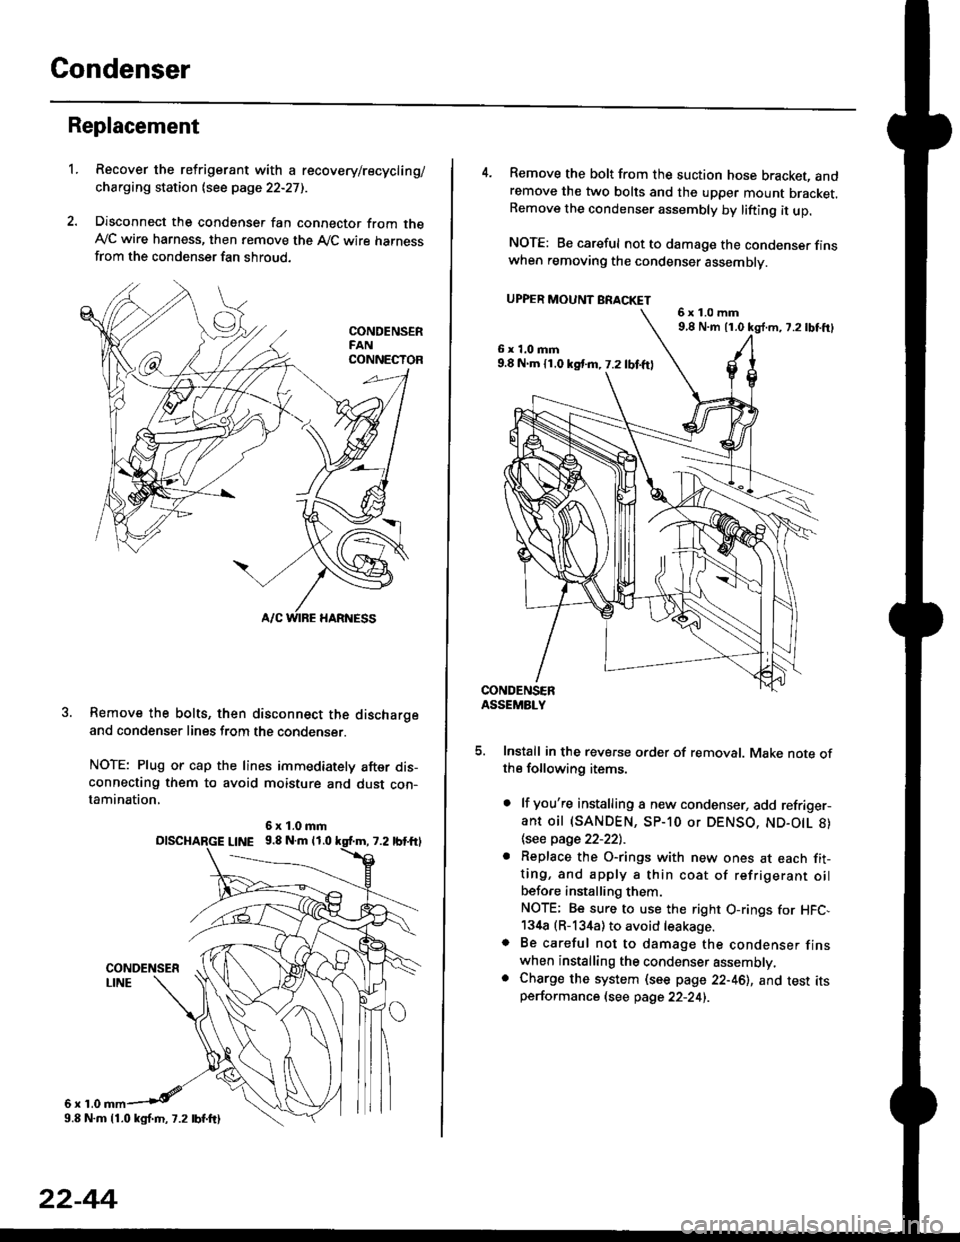 HONDA CIVIC 1997 6.G Workshop Manual Condenser
Replacement
1.Recover the refrigerant with a recovery/recycling/
charging station lsee page 22-271.
Disconnect the condenser fan connector from theAyC wire harness, then remove the A,/C wir